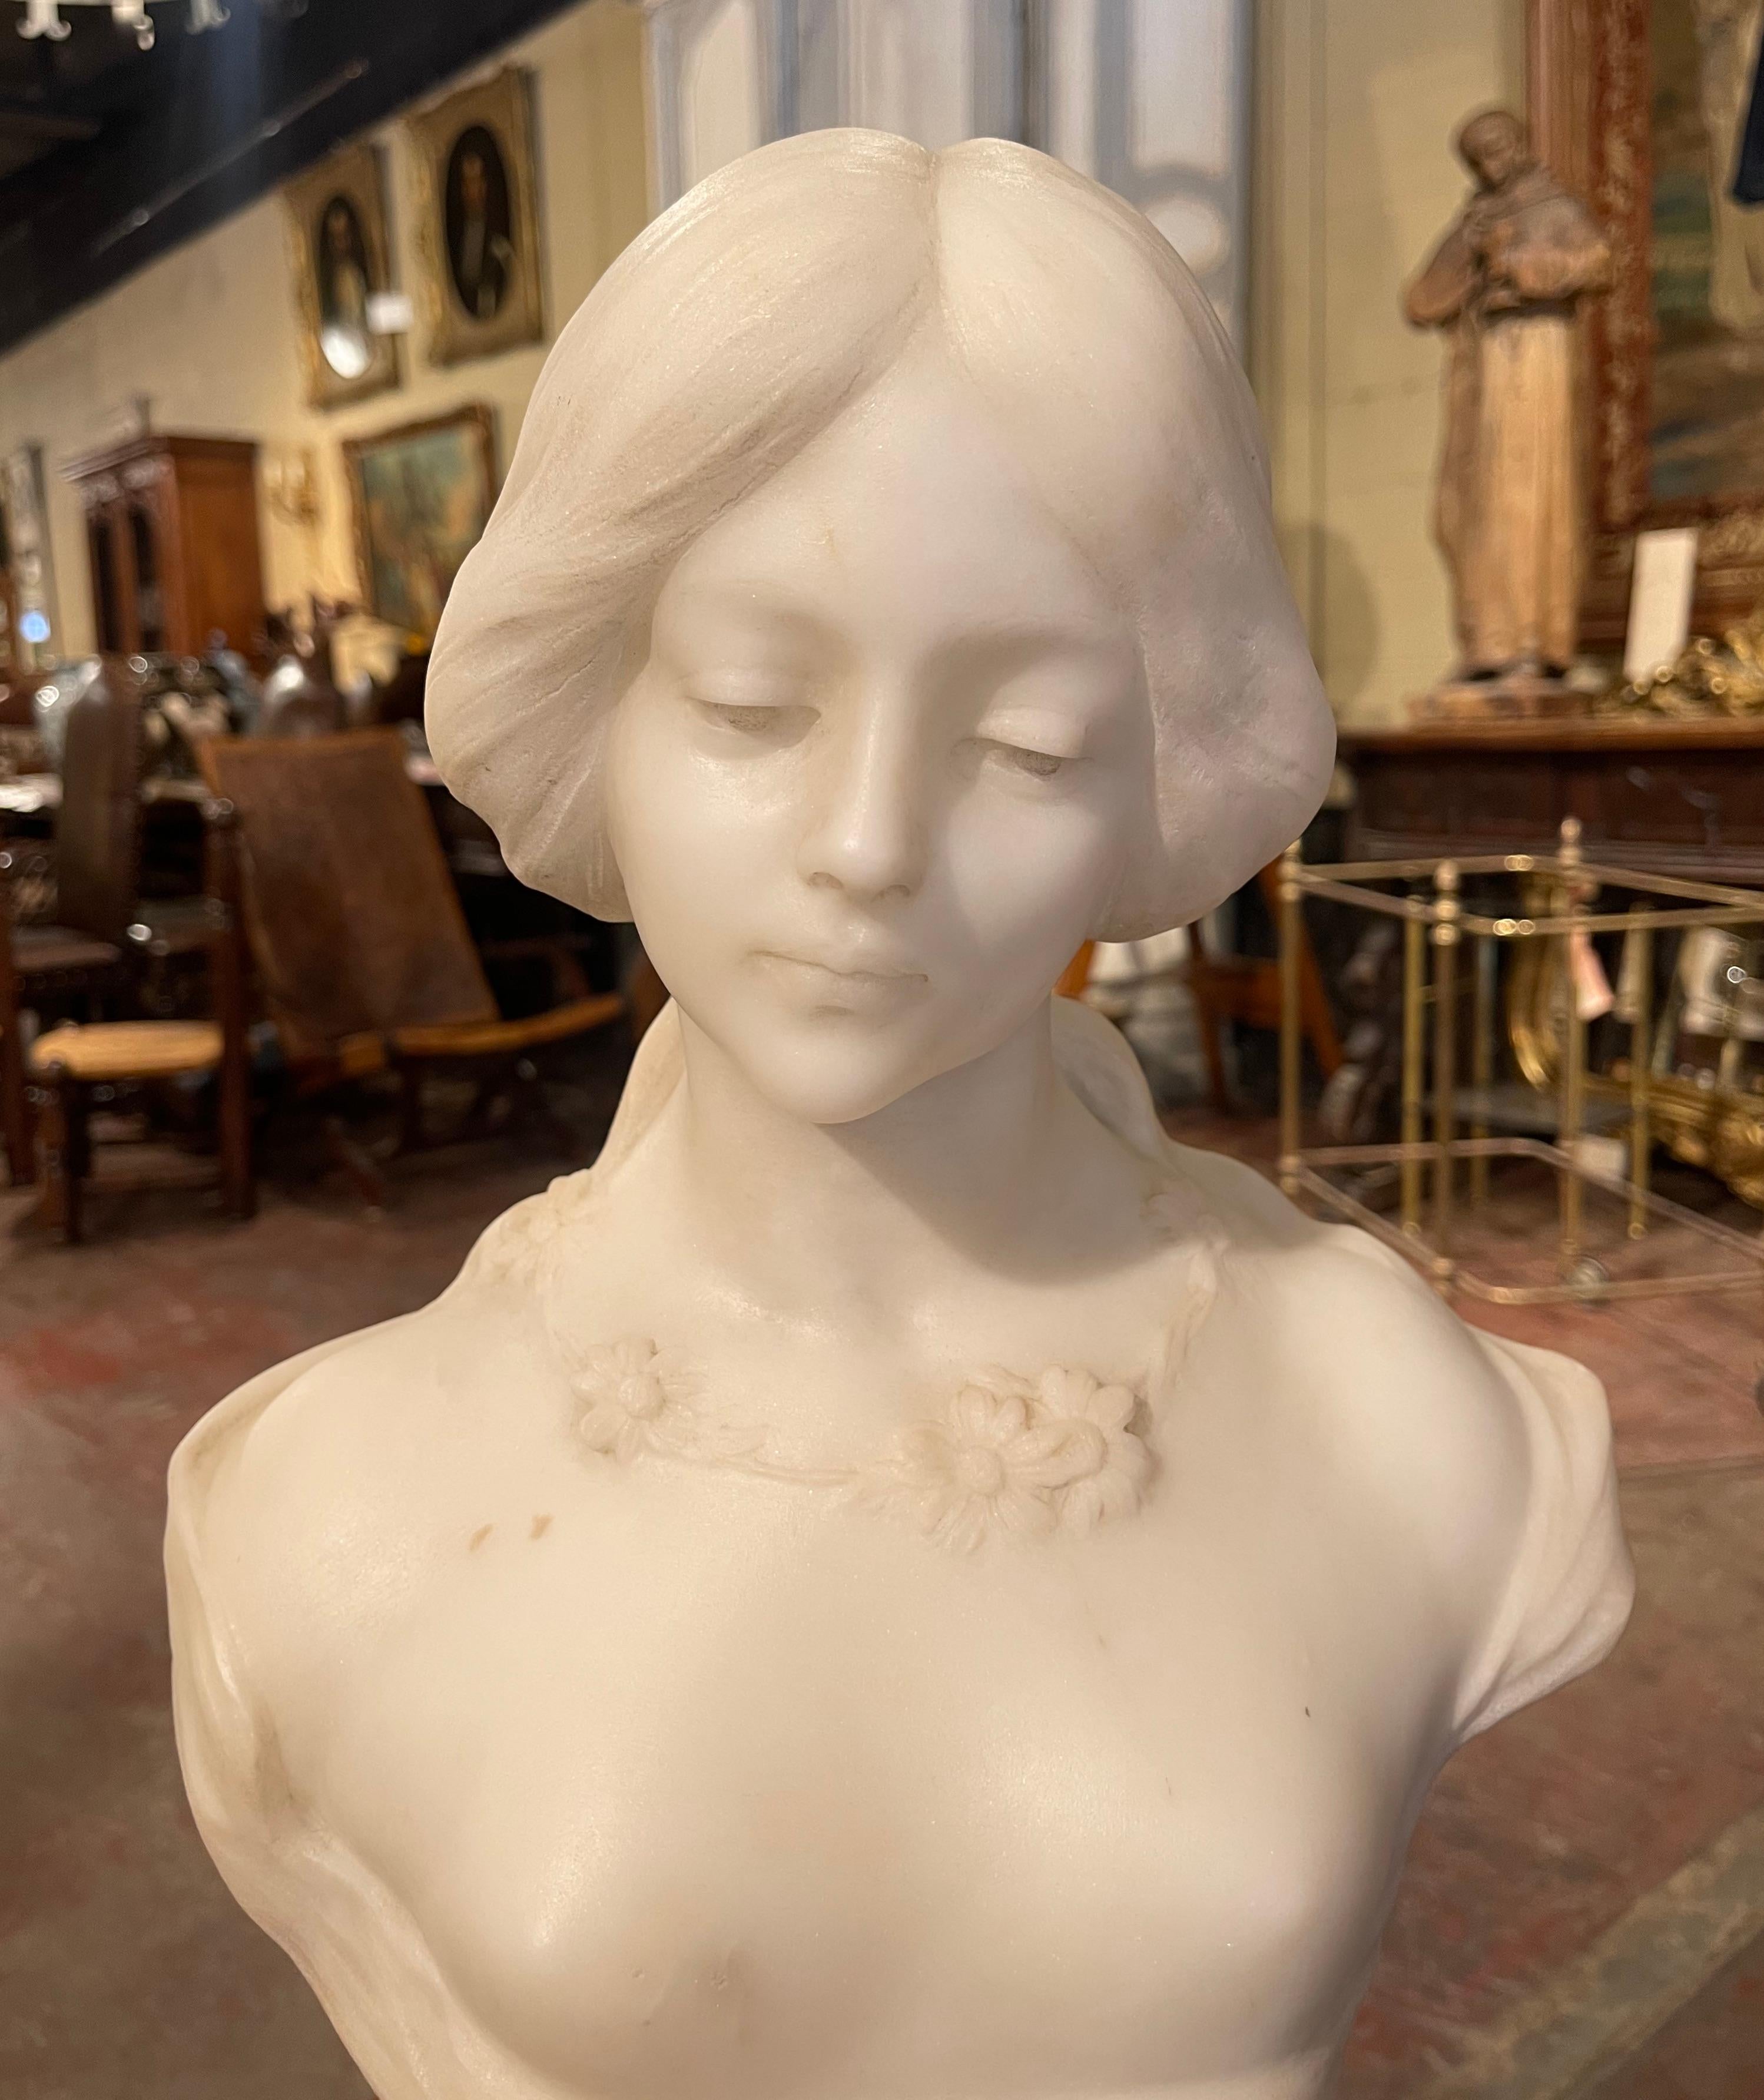 Crafted in France circa 1920, this two-piece white marble bust on a quartz base is a true representation of French elegance. The figural sculpture features the visage of a beautiful, young girl in a lace dress with delicately posed hands. There are